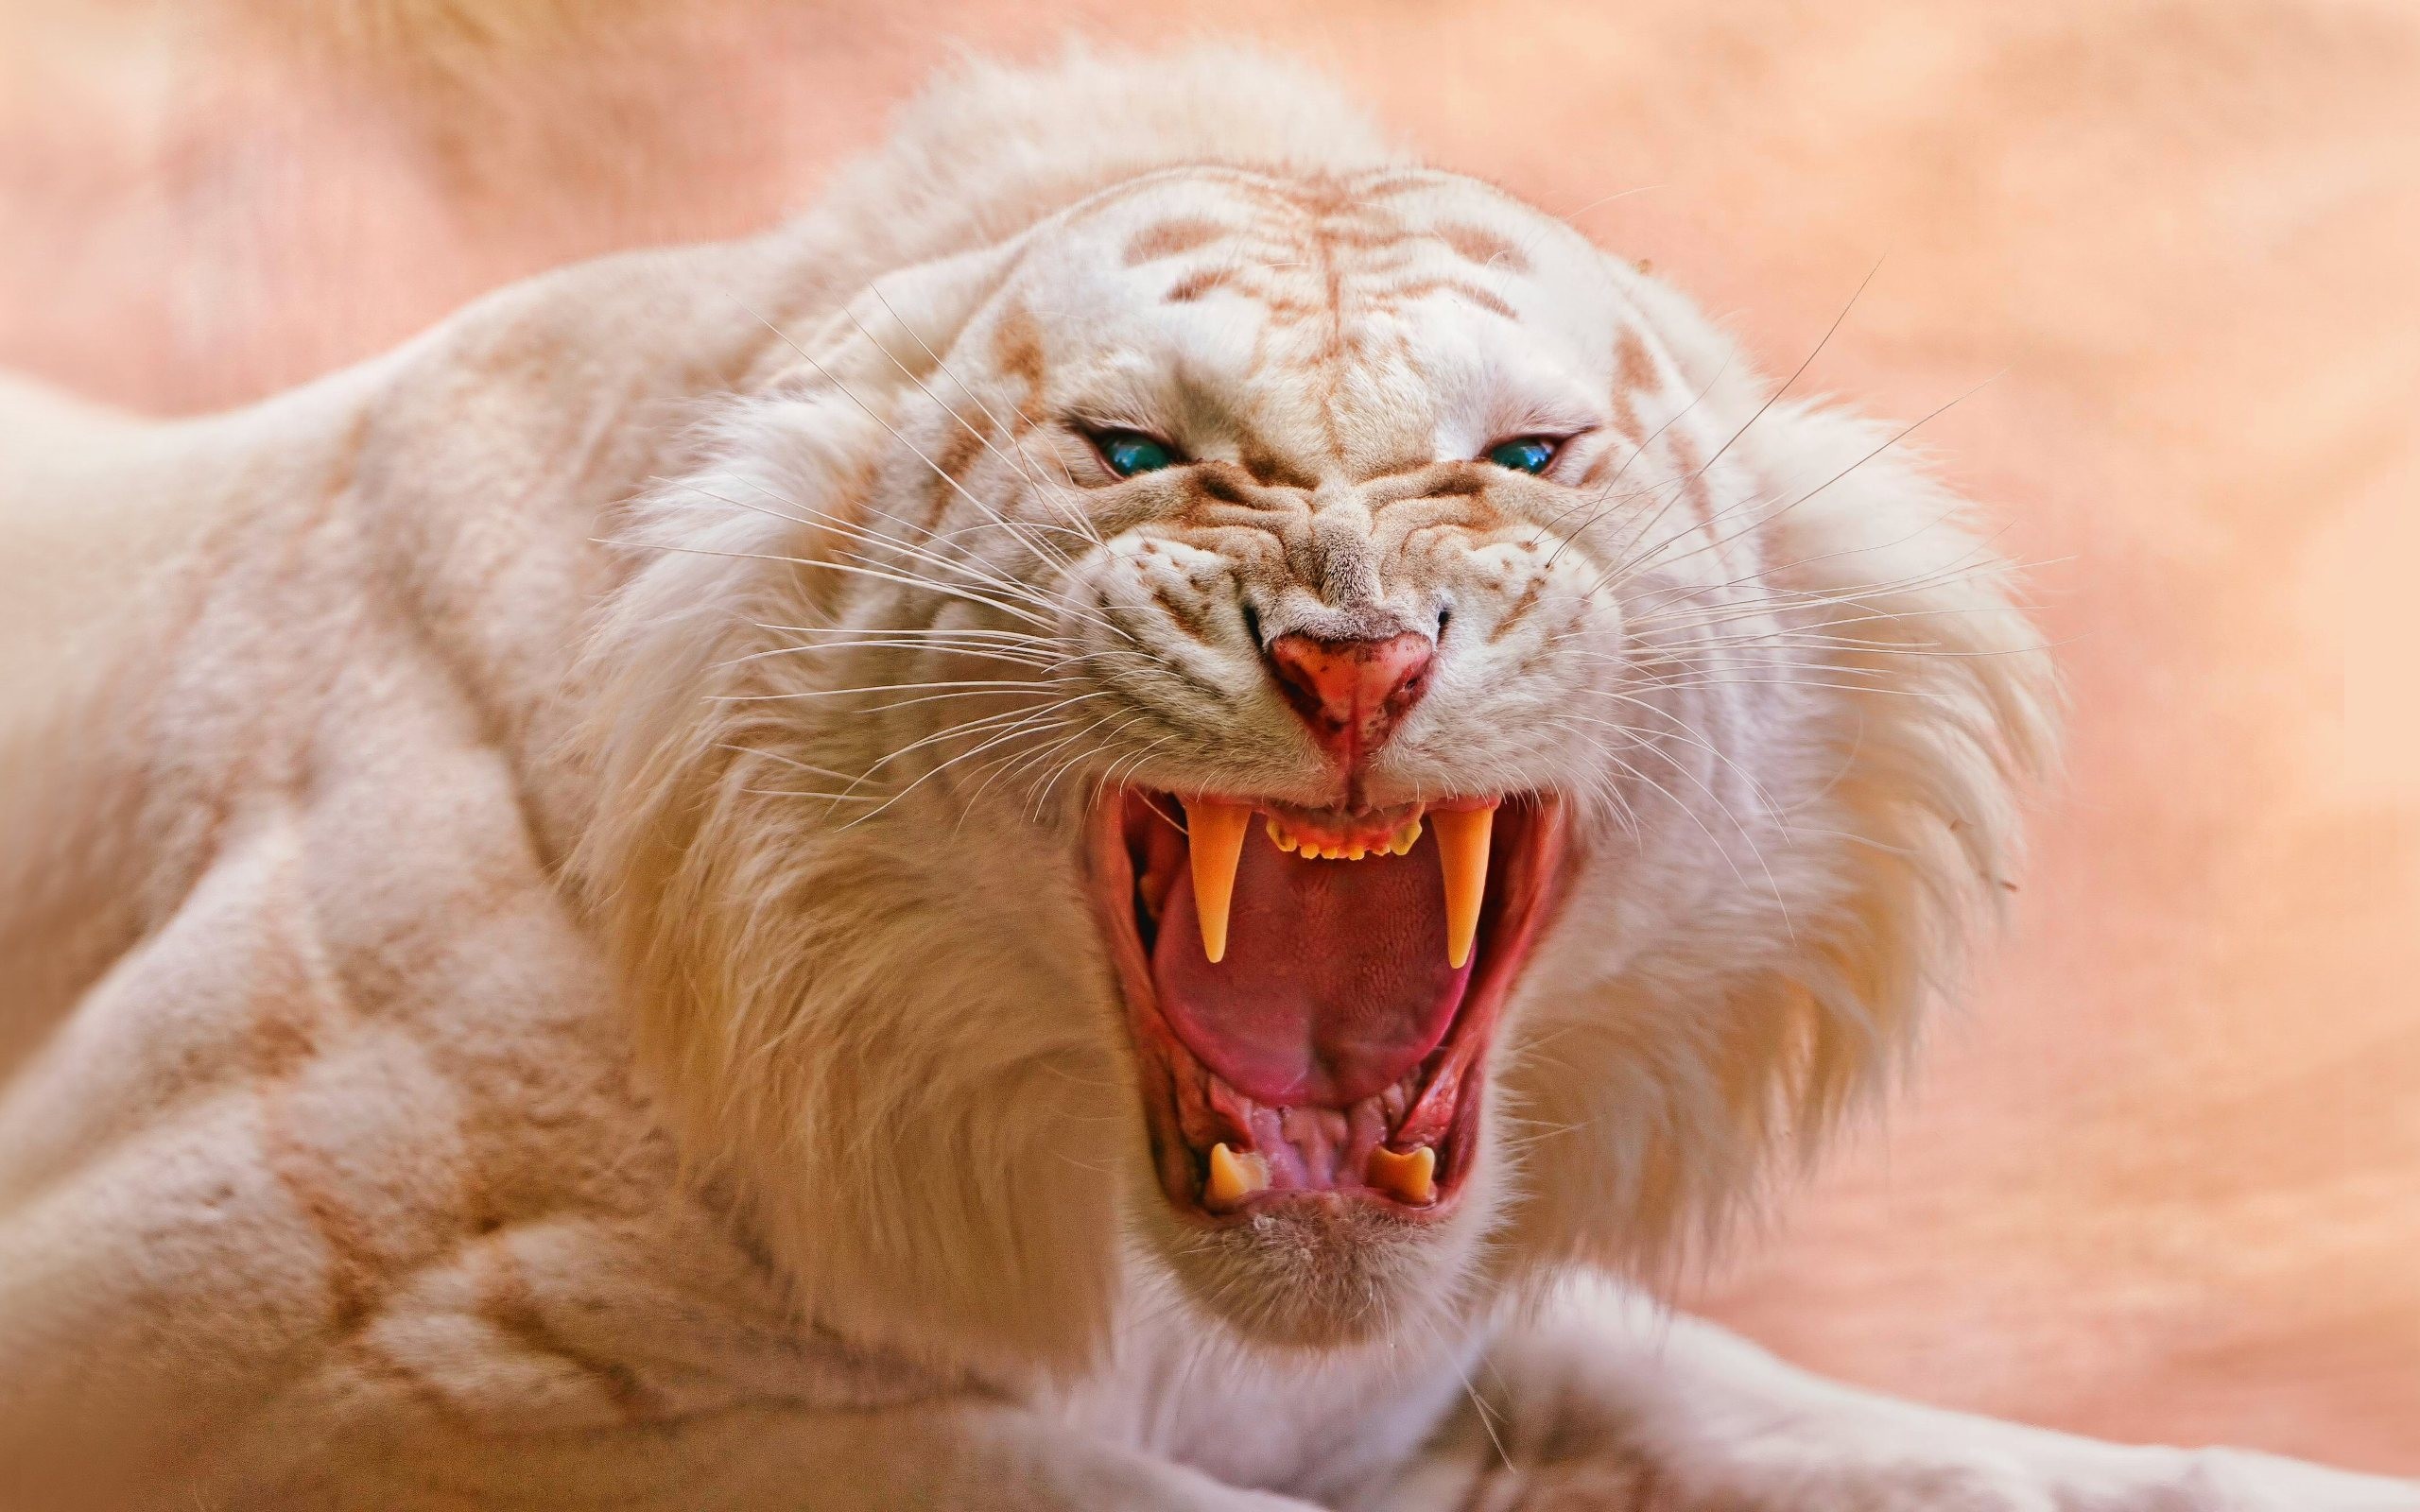 General 2560x1600 animals tiger white tigers nature open mouth blue eyes roar fangs angry closeup big cats mammals